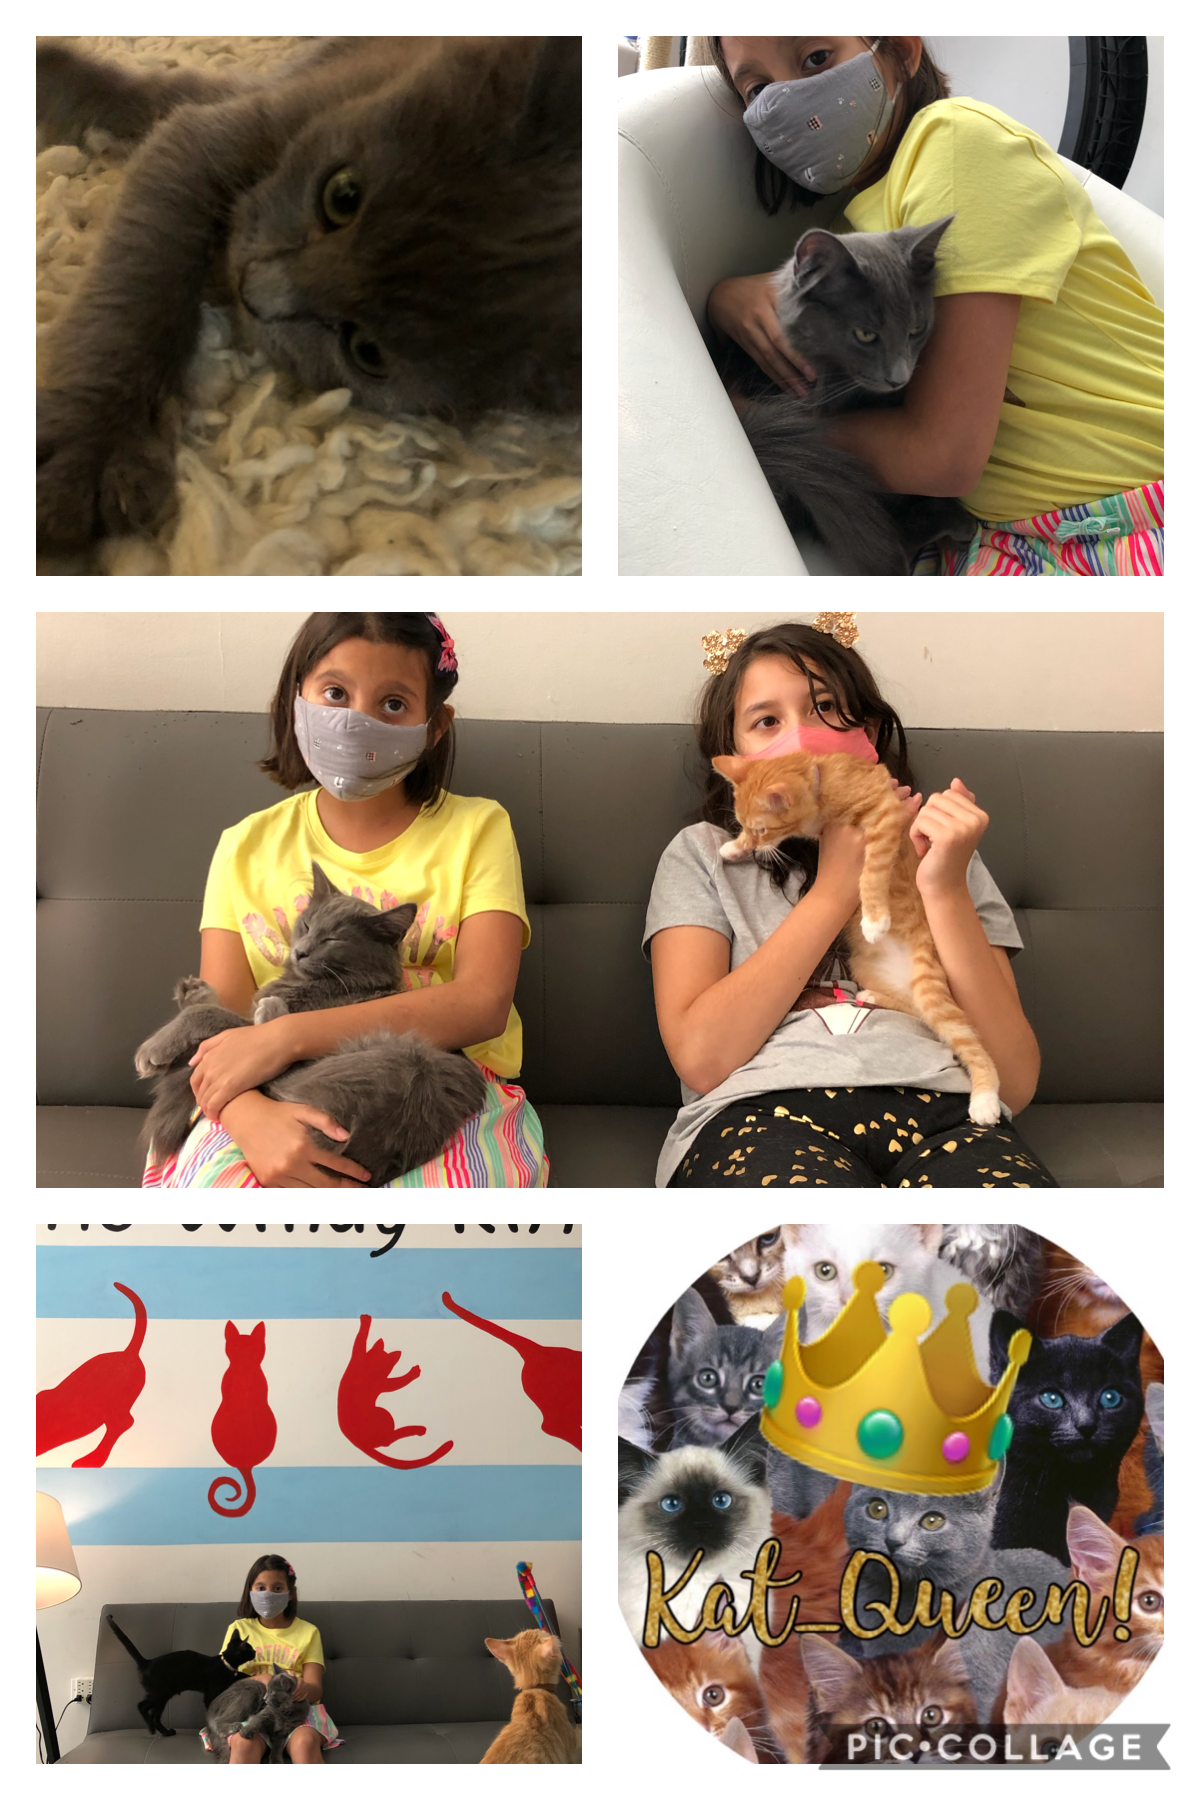 My time at the windy kitty cat cafe